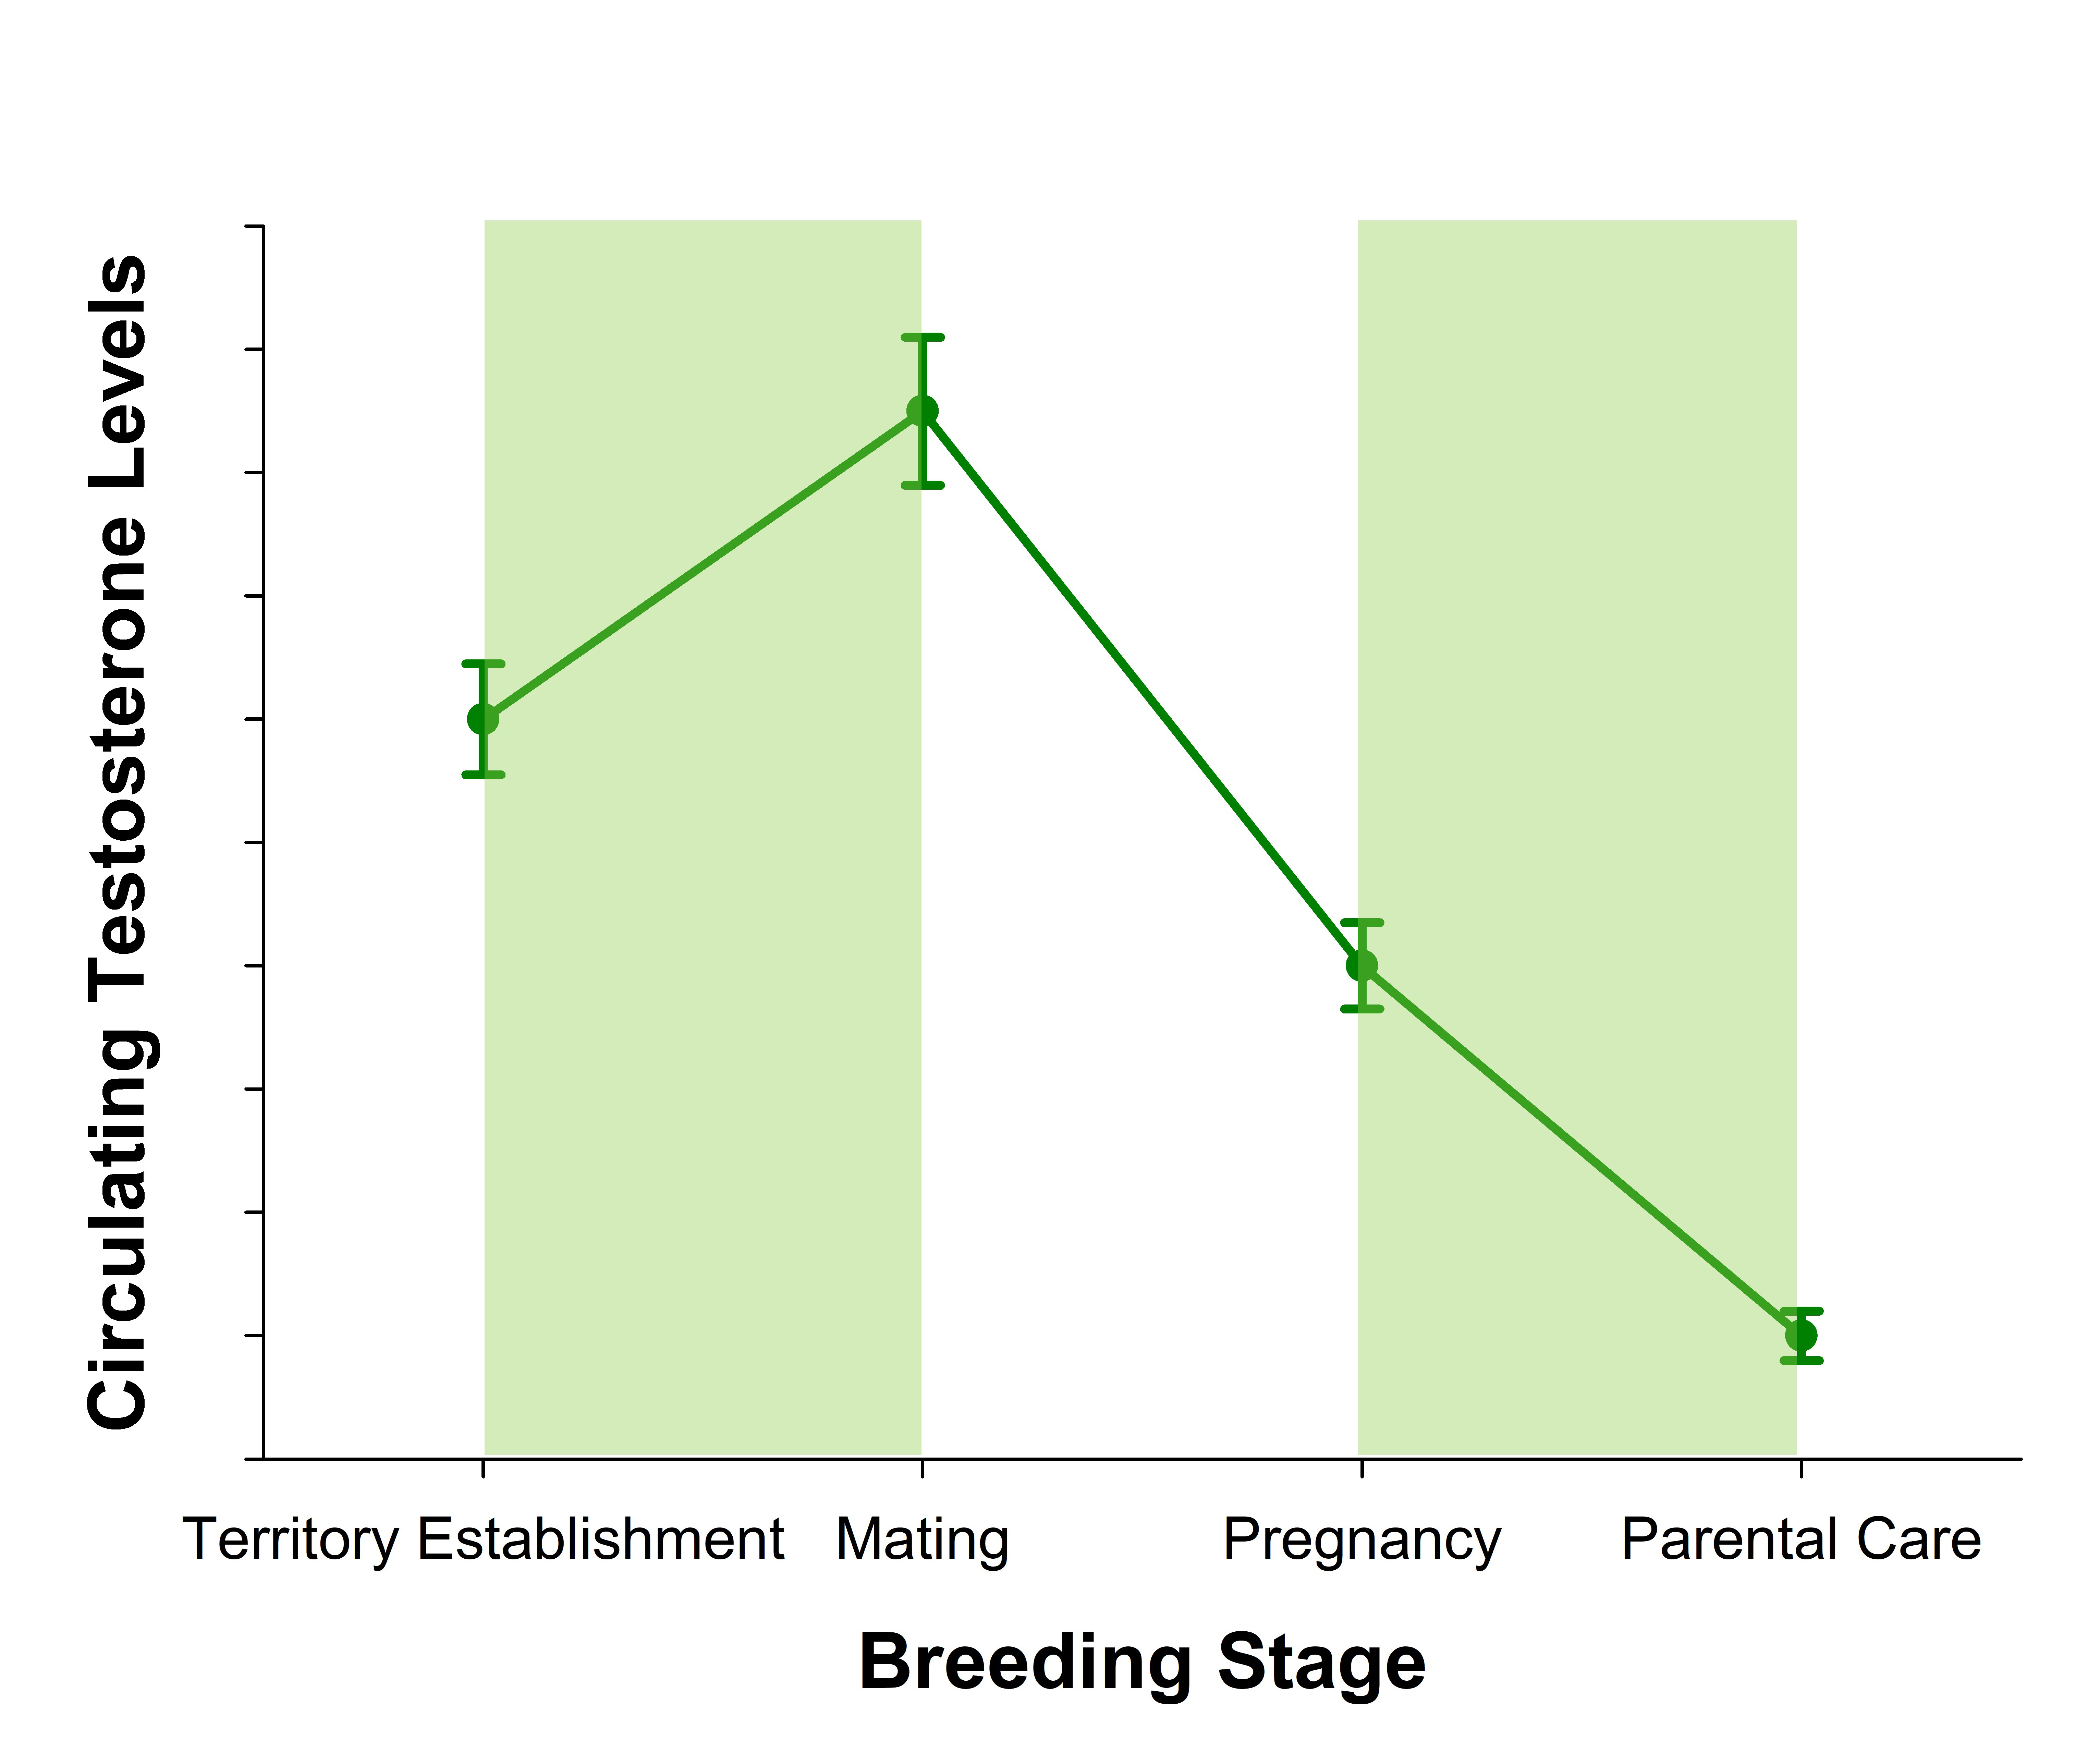 A line graph depicting how circulating testosterone levels are predicted to change in male birds during different changes of the breeding season. The x-axis is entitled “Breeding Stage” and has four different tick labels: territory establishment, mating, pregnancy, and parental care. The y-axis is entitled “Circulating Testosterone Levels.” The data points, error bars, and line in the graph are green in color, and there is a light green bar between the “territory establishment” and “mating” labels on the x-axis. This green bar represents a period of frequent male-male interactions or mate guarding. Circulating testosterone levels are relatively high during the territory establishment stage and reach a maximum value during the mating stage. During the pregnancy and parental care stages, circulating testosterone levels are lower than those observed during the territory establishment and mating stages. Testosterone levels reach a minimum value during the parental care stage.